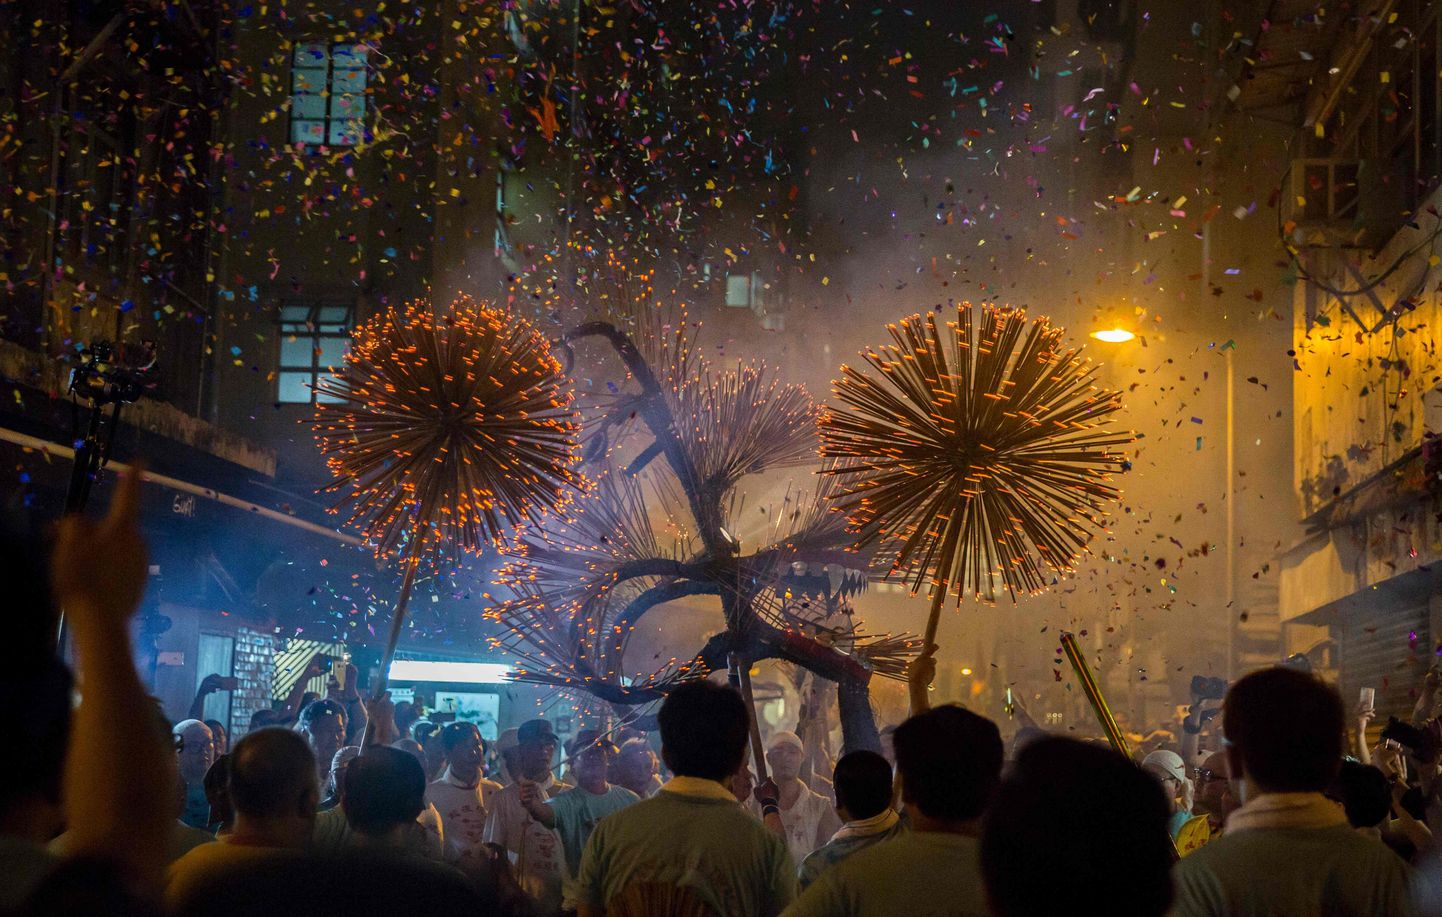 TOPSHOT - This picture taken on September 14, 2016 shows members of the fire dragon dance team holding up the 'dragon' as it winds through the narrow streets and houses during the Tai Hang Fire Dragon Dance in Hong Kong.
The century-long tradition involves waving incense-lit, straw-filled dragons to bring blessings to onlookers under the full moon during the annual Mid-Autumn Festival. / AFP PHOTO / ISAAC LAWRENCE